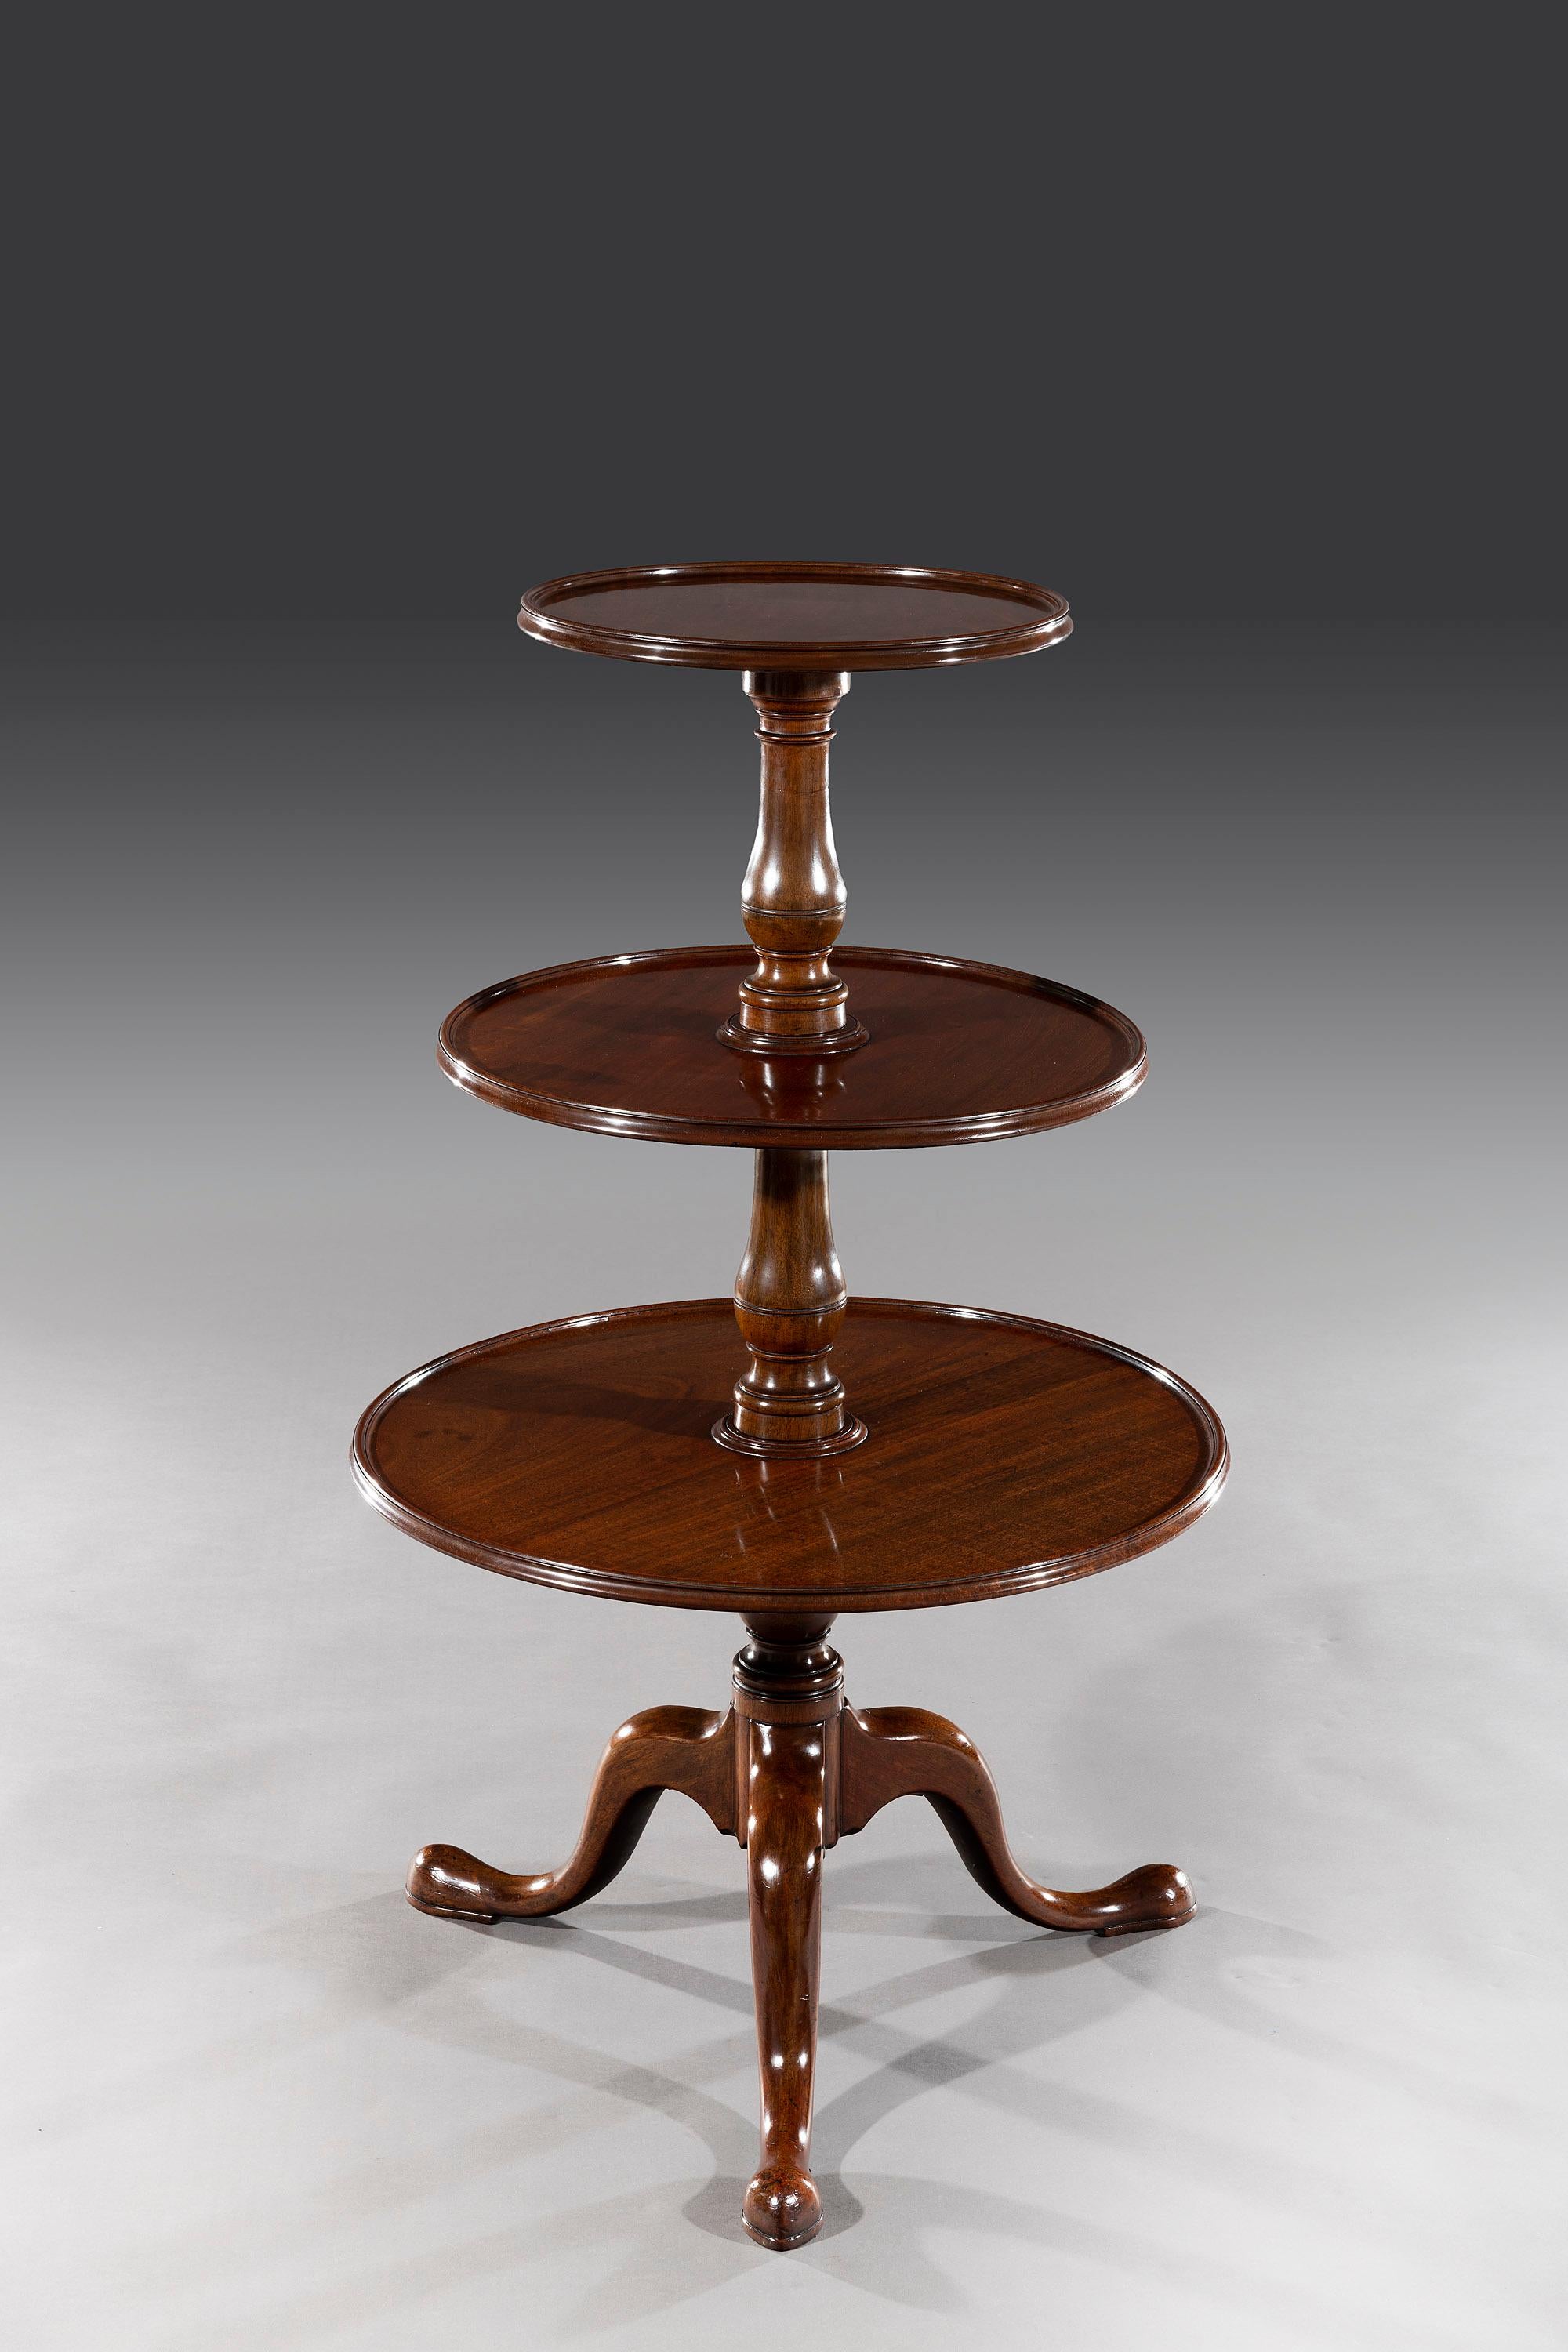 The three solid mahogany circular tiers are graduated and fitted to a turned column. Each tier rotates freely and the dumbwaiter stands on a bulbous shaped pedestal above elegant down-swept legs that sit on pad feet and brass castors.